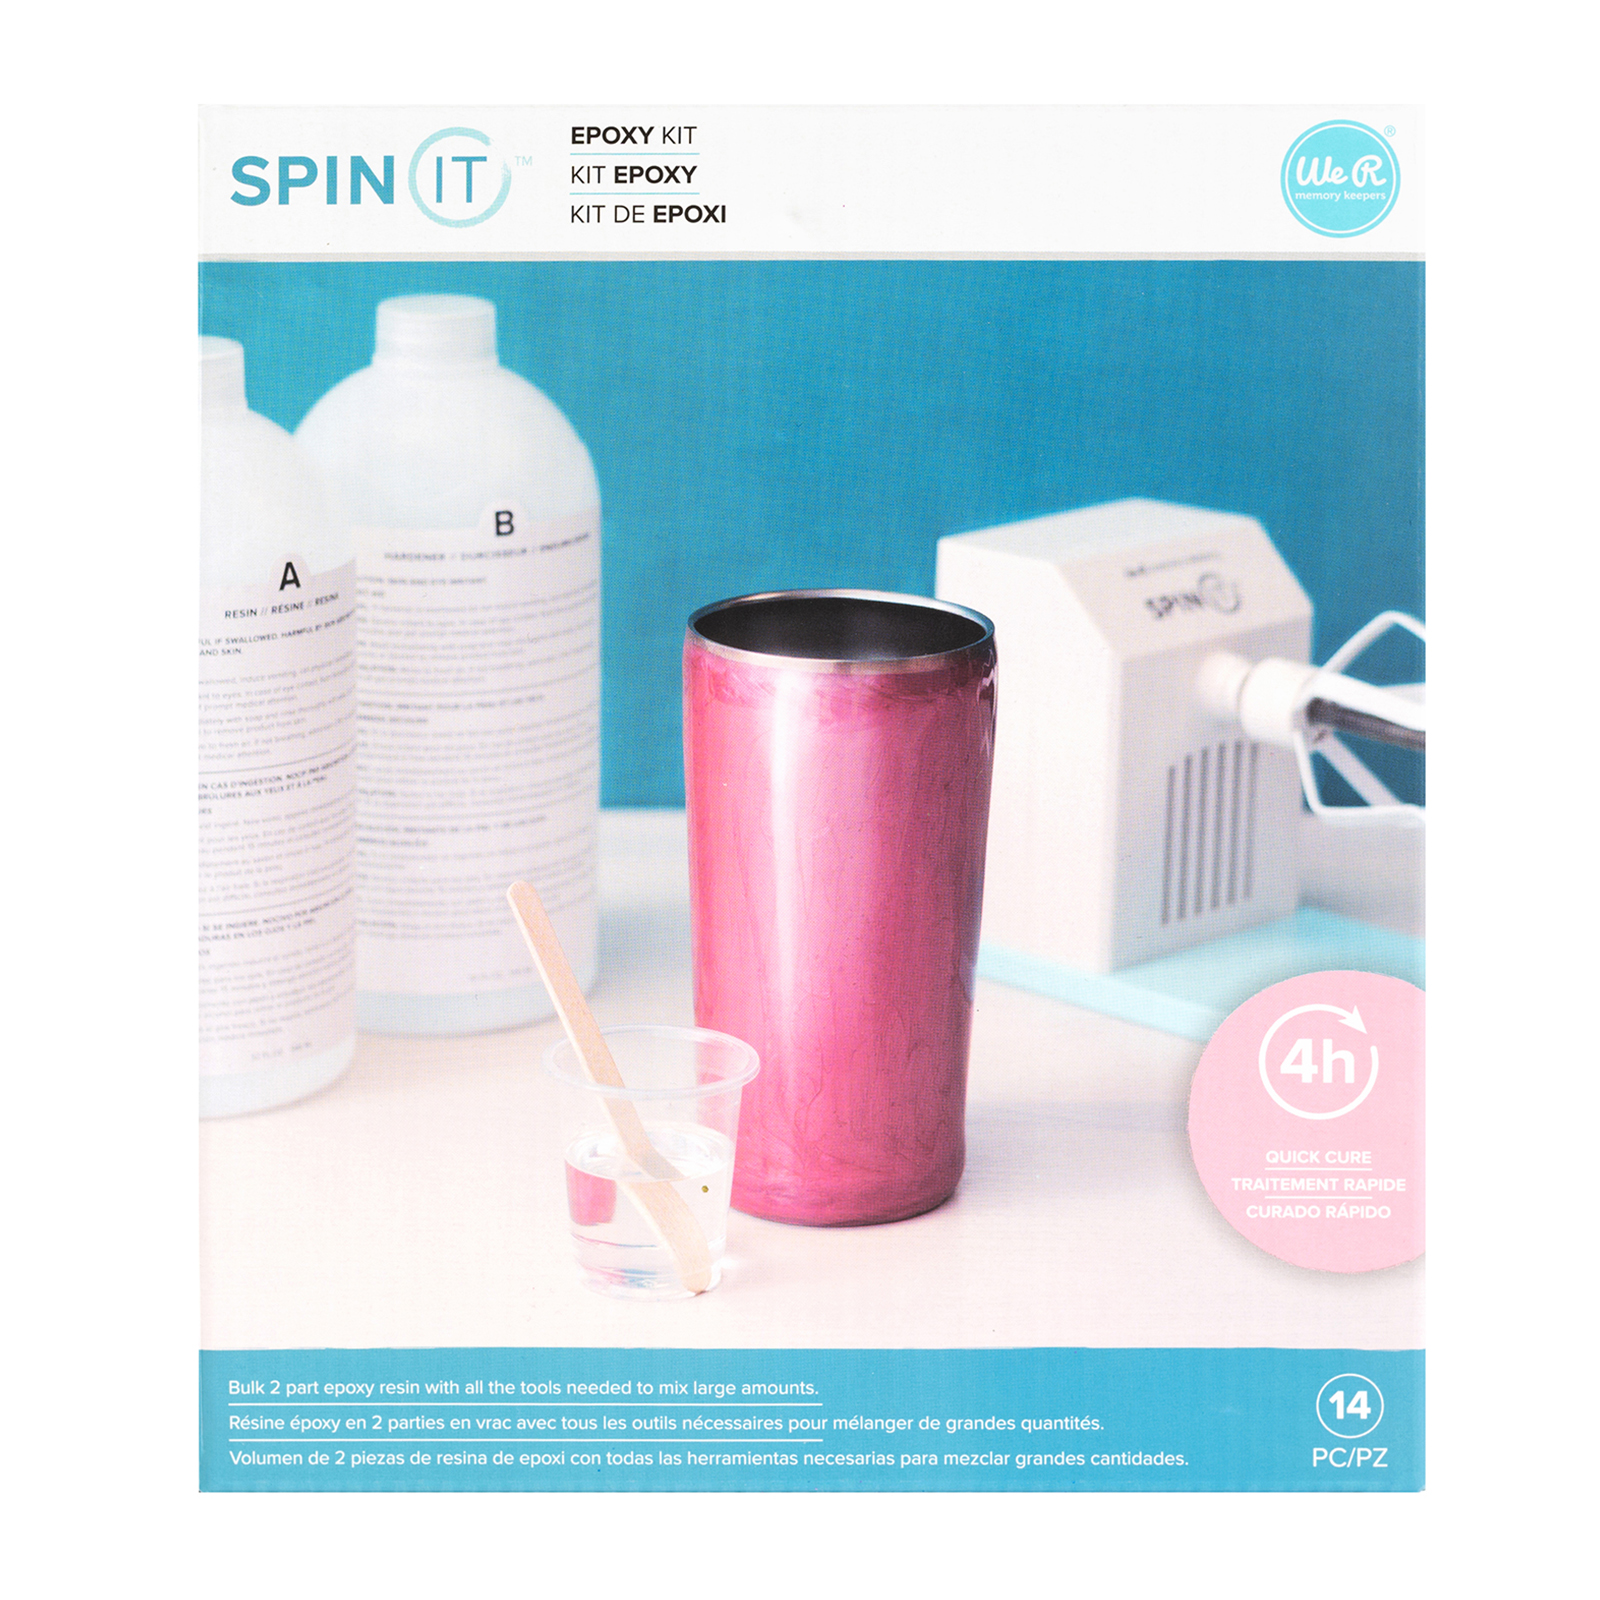 We R Makers • Spin IT epoxy kit